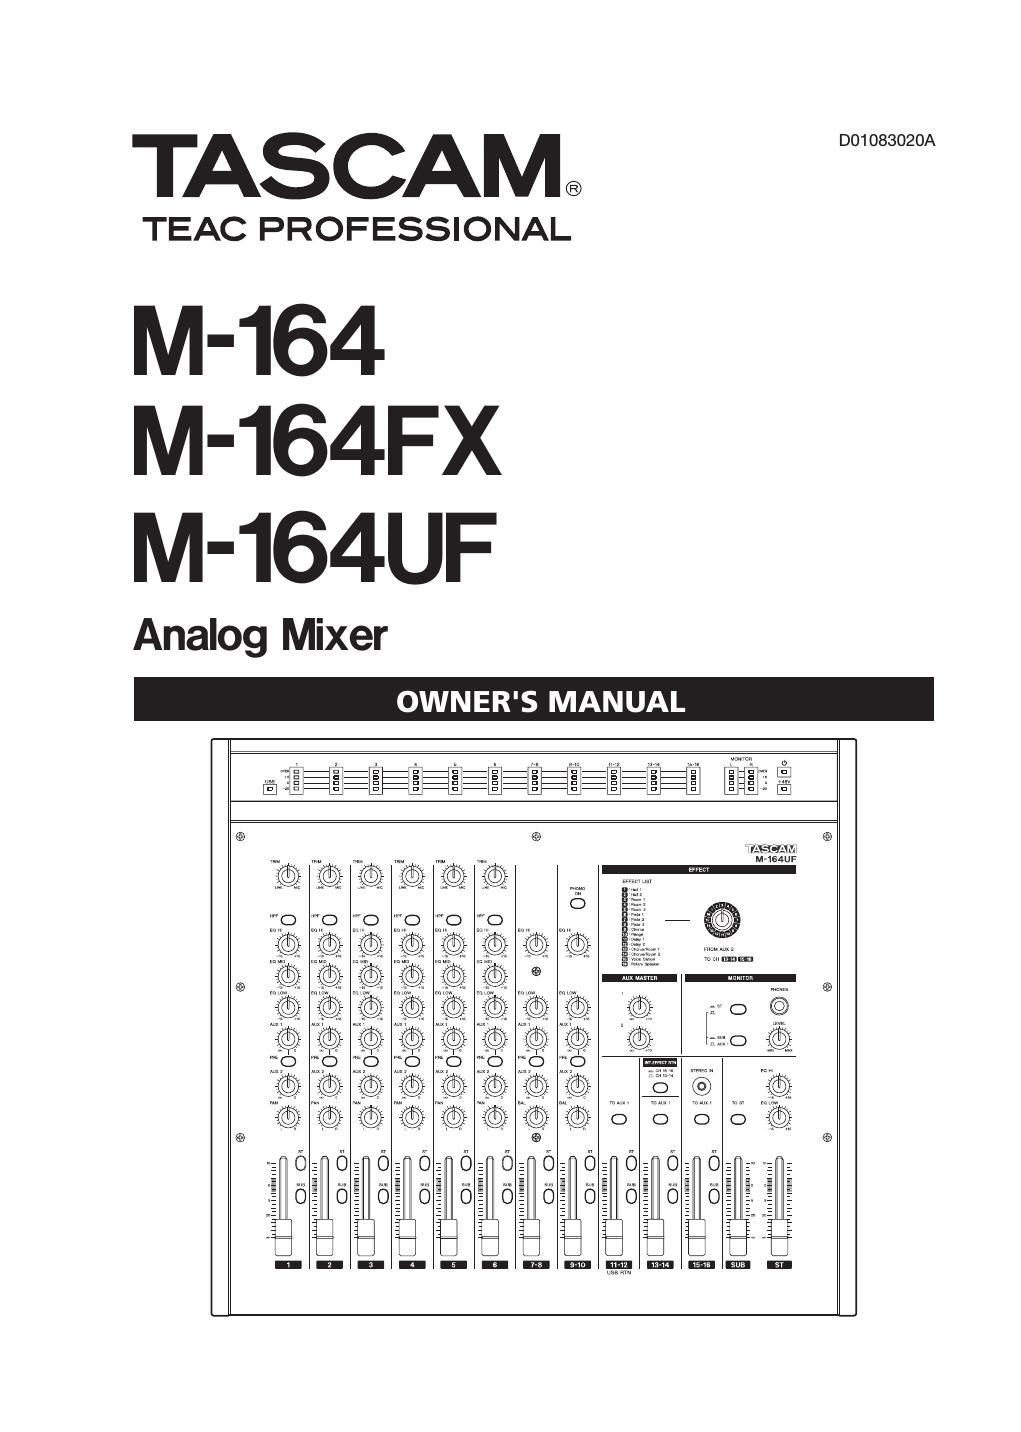 Tascam M 164 M 164FX M 164UF Owners Manual